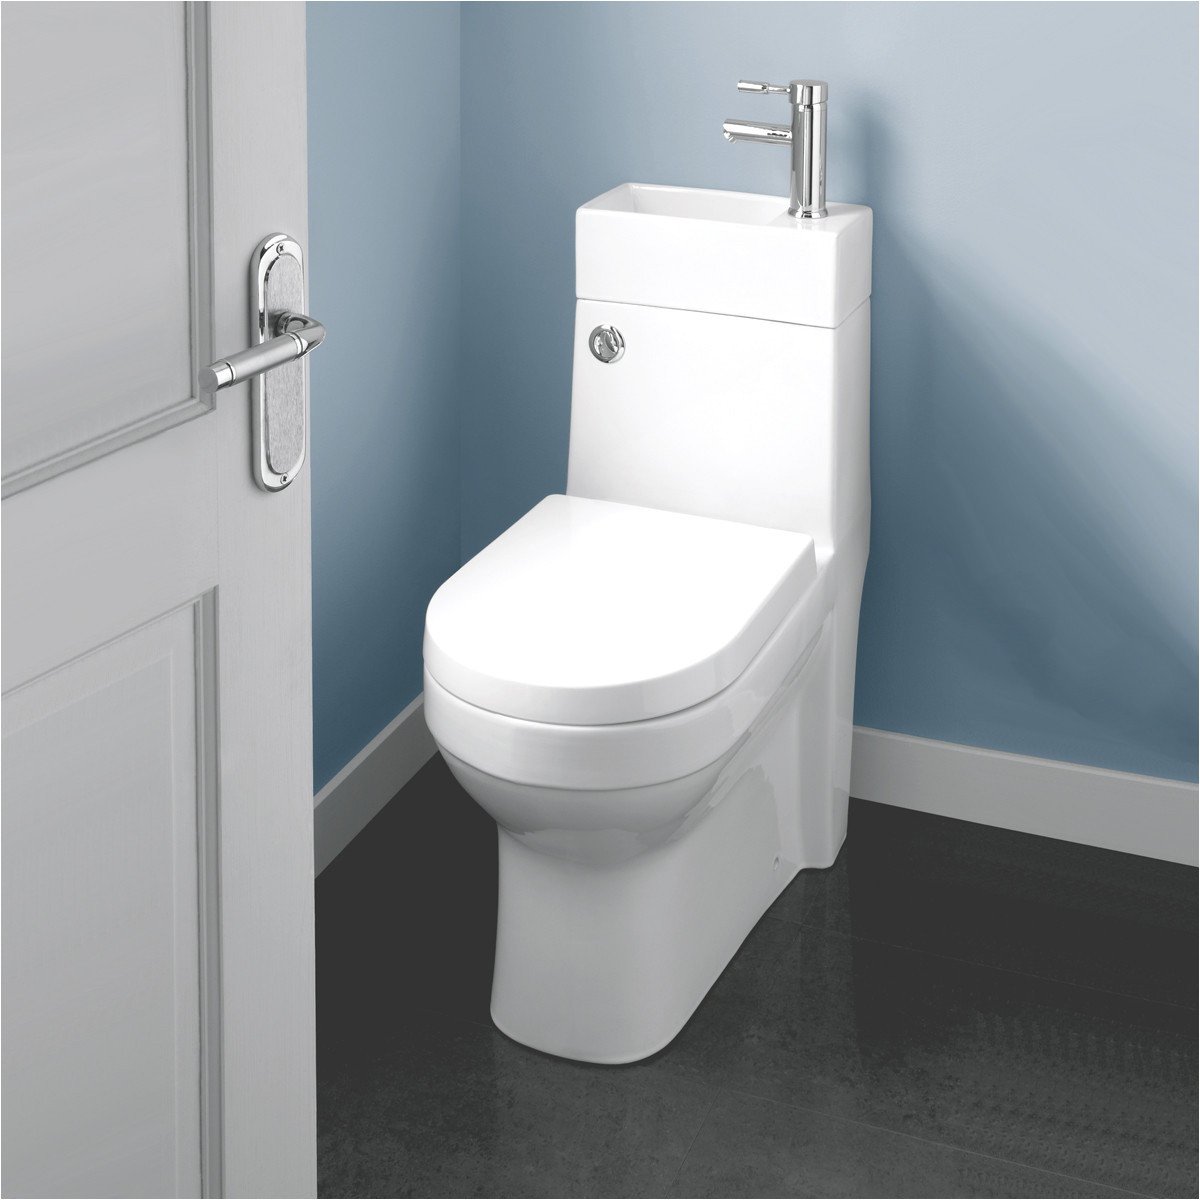 Toilet Sink Combo Units For Sale Combination Close Coupled